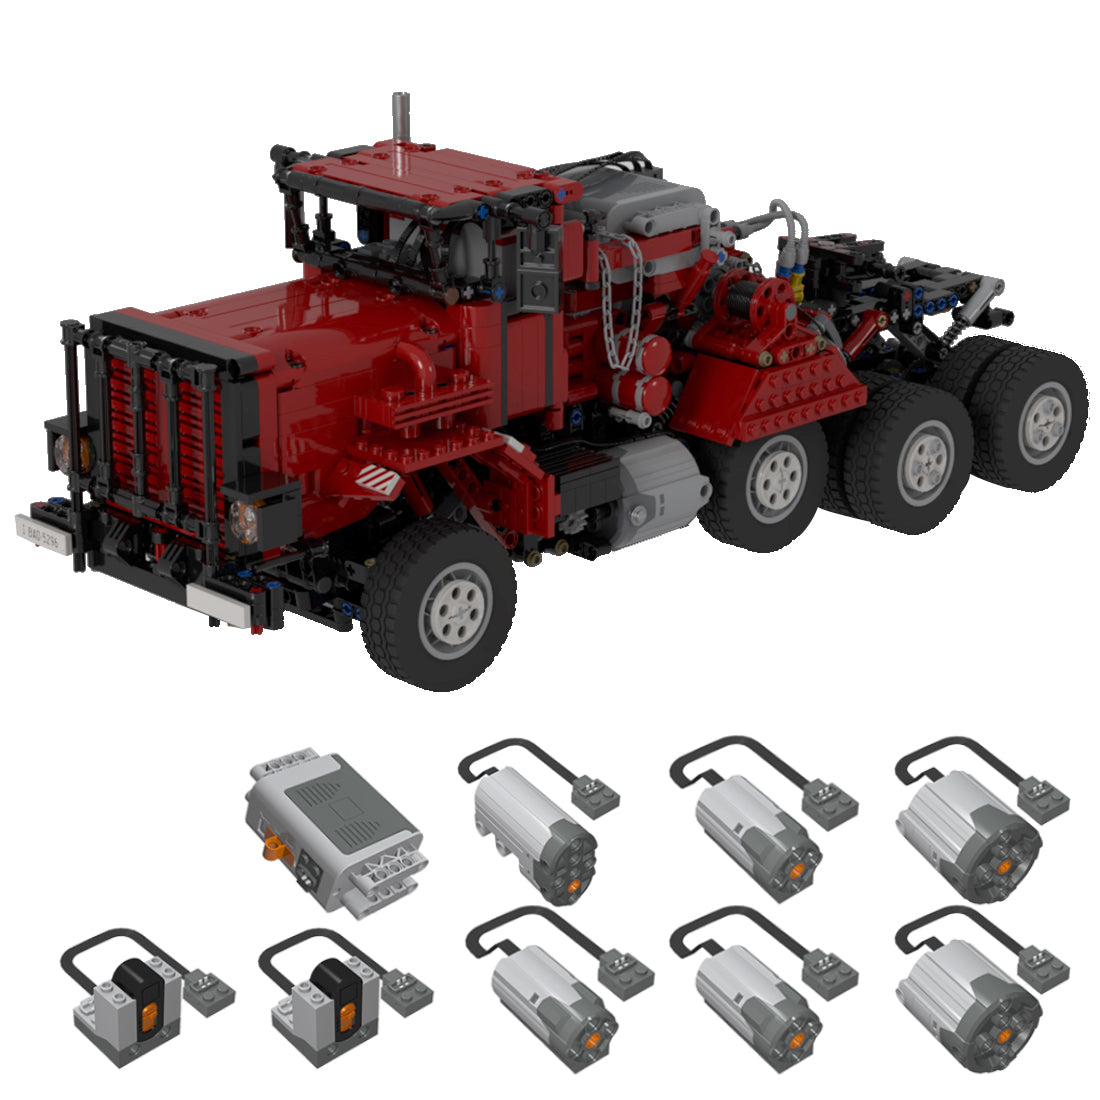 Heavy Equipment Transporter with Suspension - Dynamic